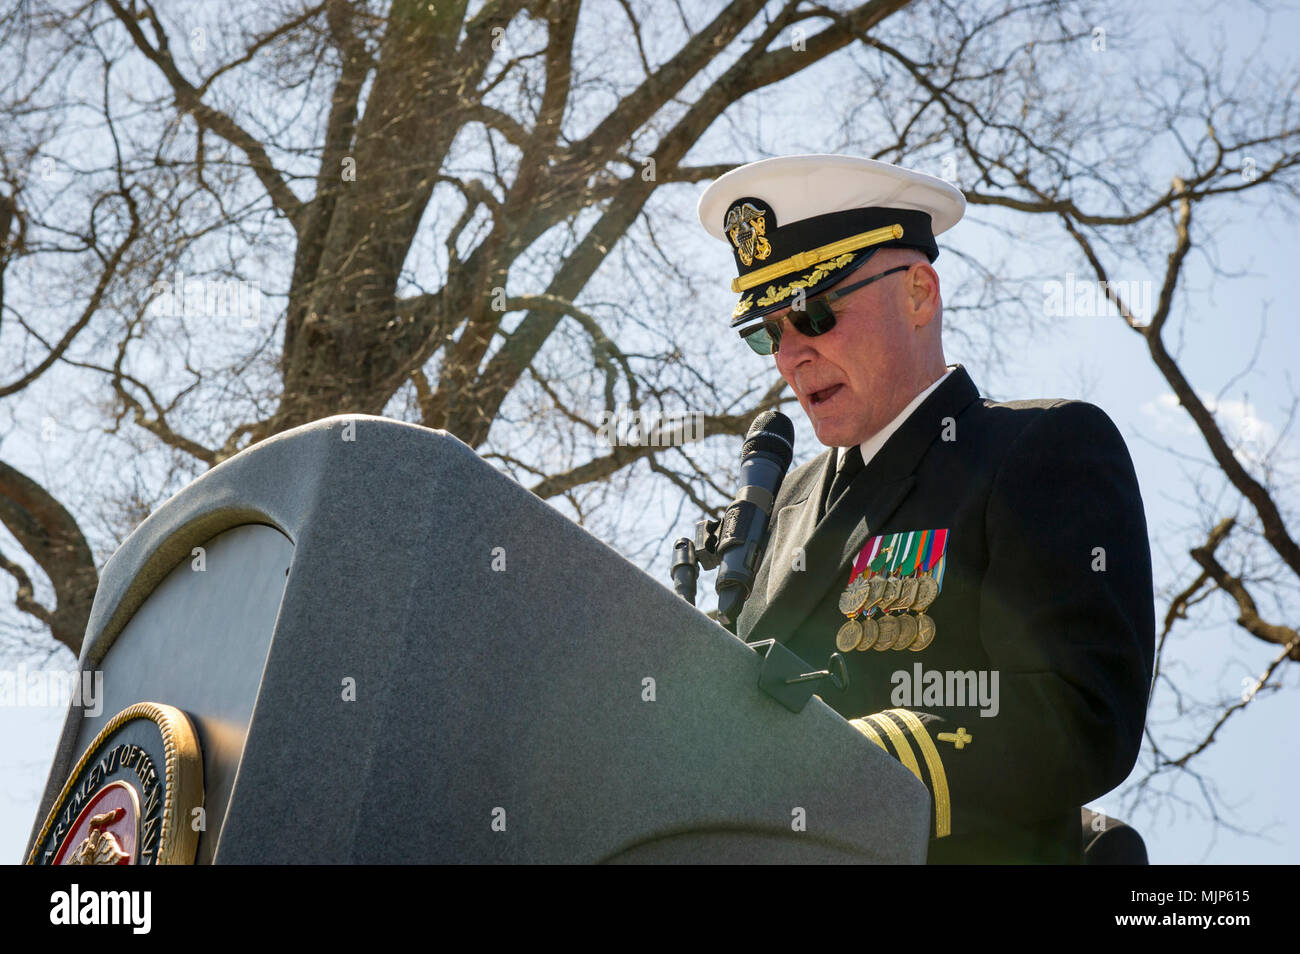 U.S. Navy Chaplain Stephen Barstow, commander, gives the invocation during the Presidential wreath laying ceremony held to honor the 4th President of the United States, James Madison, also known as the Father of the Constitution, at his home at Montpelier, Orange, Va., March 16, 2018. This event was held in commemoration of the 267th anniversary of the birth of Madison, born in 1751, and has also been decreed as James Madison Appreciation Day for the Commonwealth of Virginia. Armed Forces and civilians displaying courage bravery dedication commitment and sacrifice Stock Photo